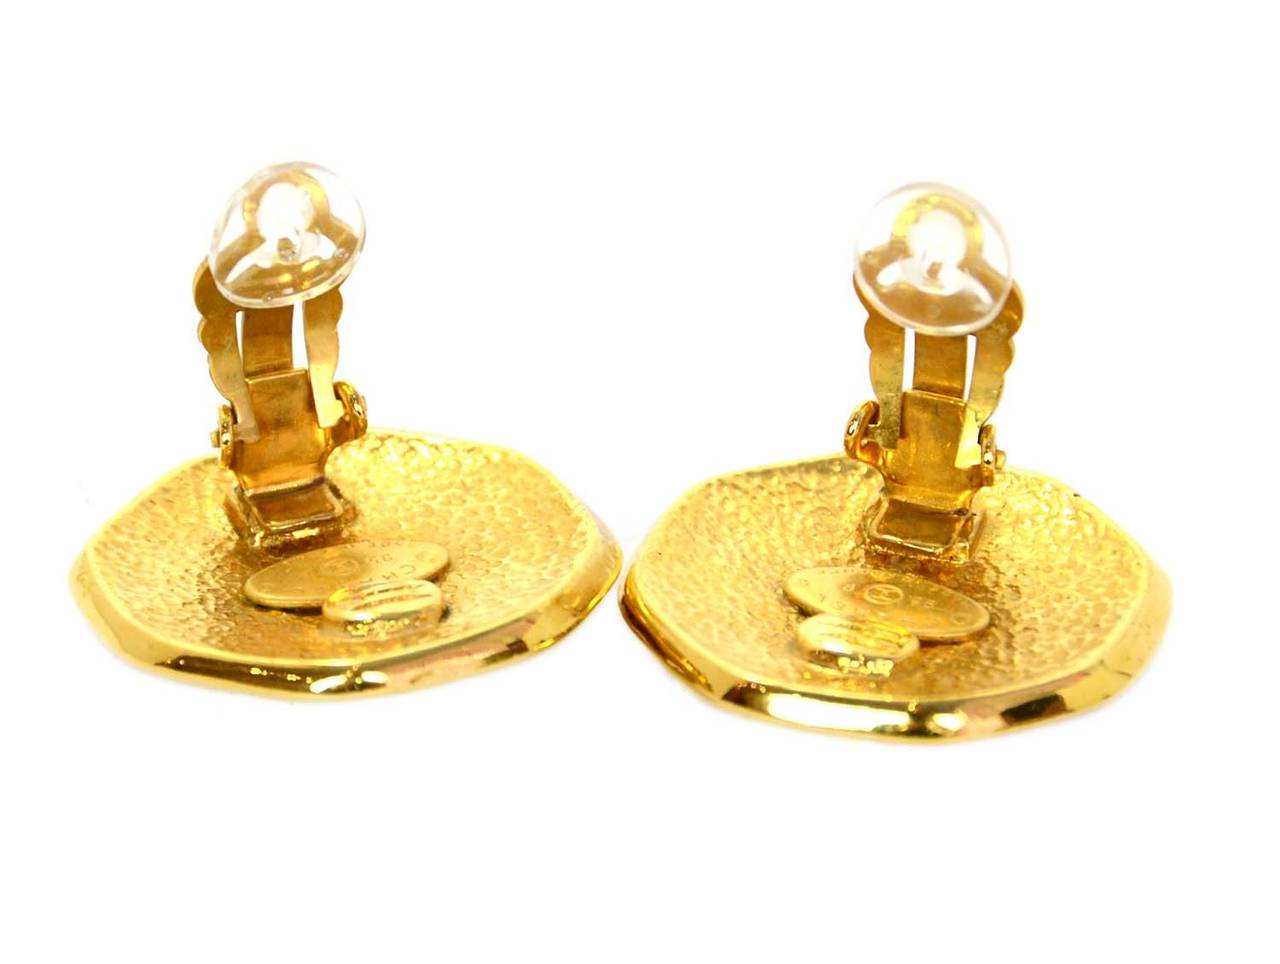 Chanel Octagonal Shaped CC Clips

-Made in: France
-Year of Production: 1995
-Materials: Goldtone metal
-Stamps: CHANEL 95P MADE IN FRANCE
-Closure: Clip closure
-Overall Condition: Excellent vintage condition 

Measurements
Total Length: